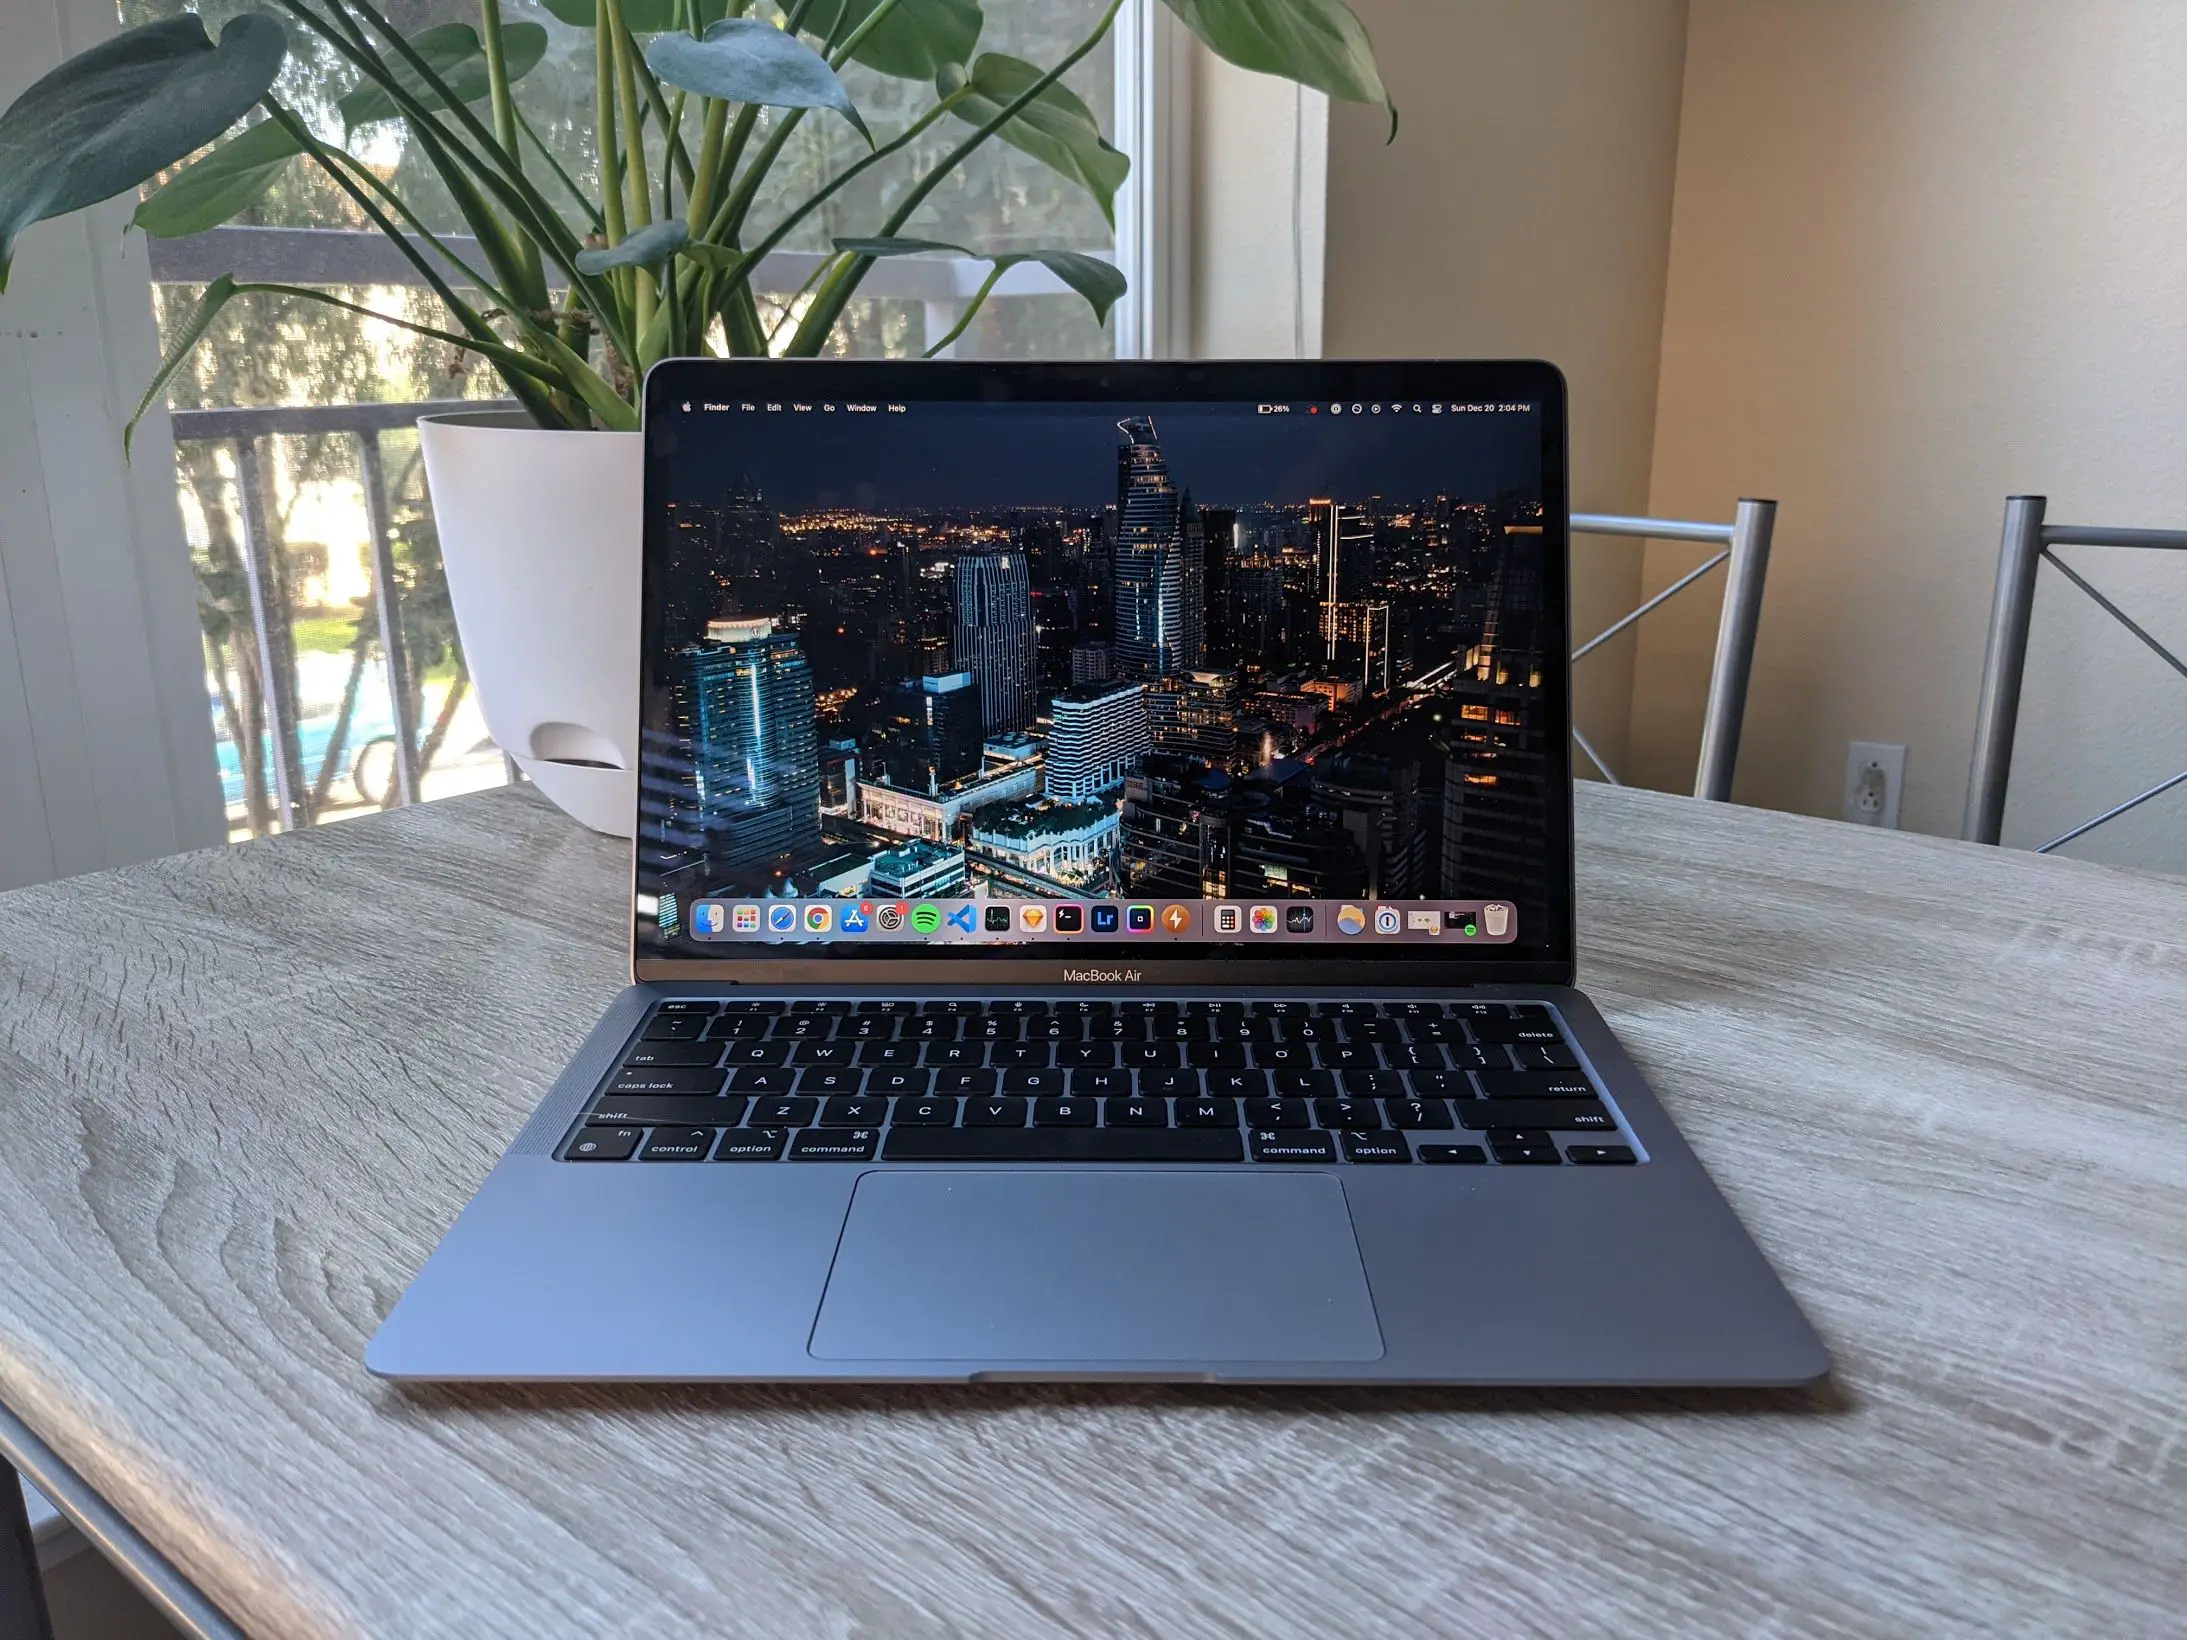 How I bought a new M1 MacBook Air for under $700 (before tax)